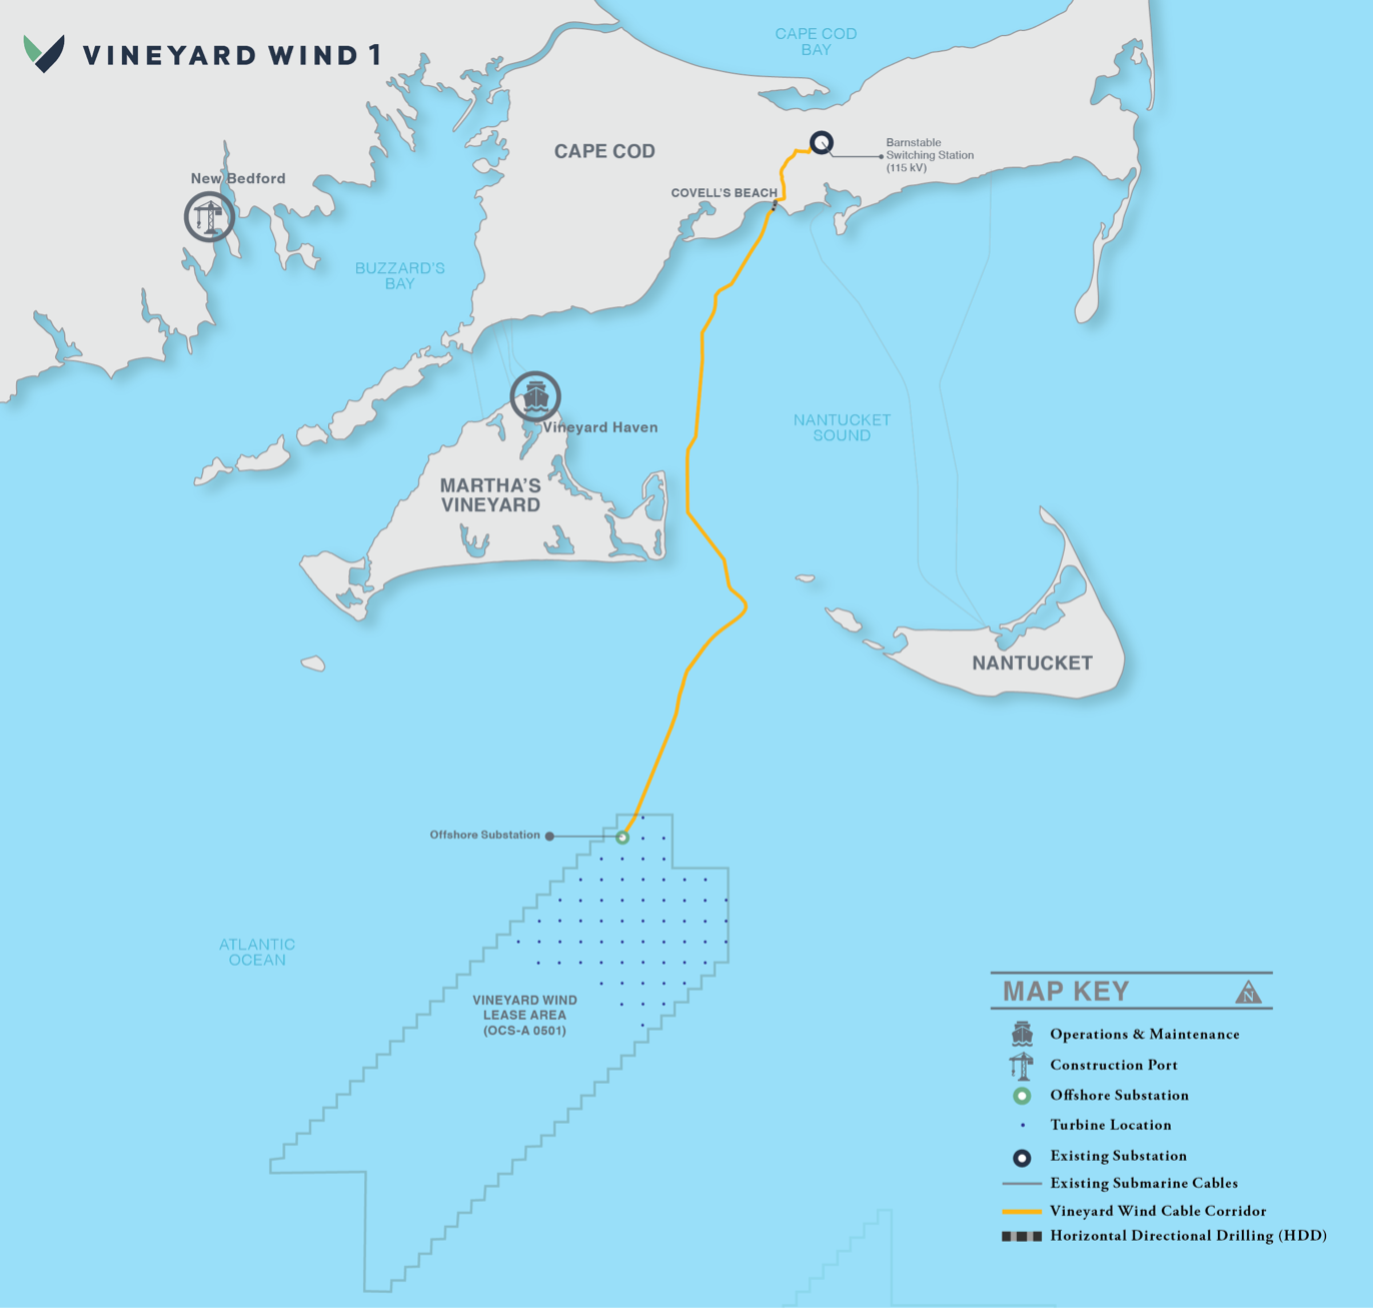 800-MW Vineyard Wind offshore wind farm to be first commercial-scale project in the US